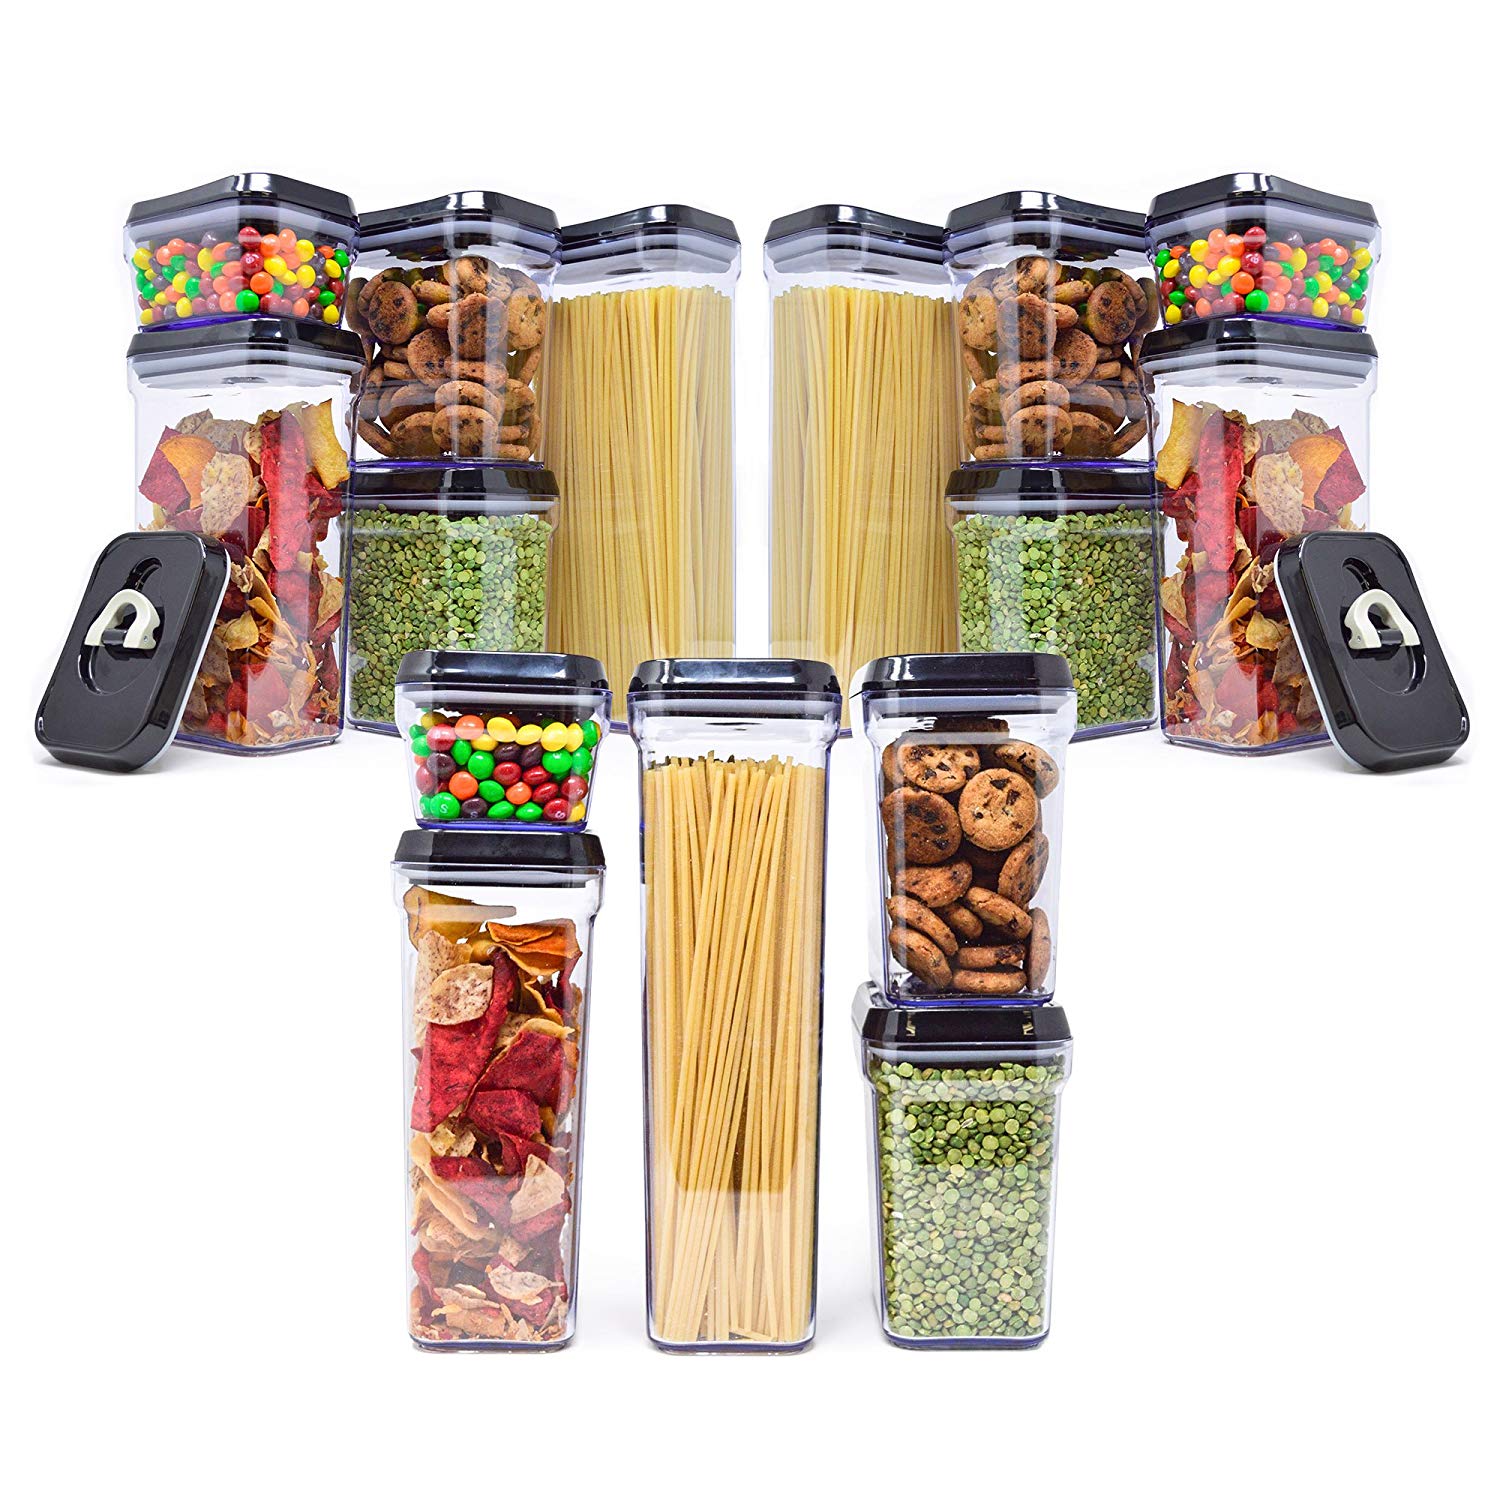 [15-Piece Set] Zeppoli Air-Tight Food Storage Container Set - Durable Plastic - BPA Free - Slightly Tinted with Black Lids - image 1 of 4